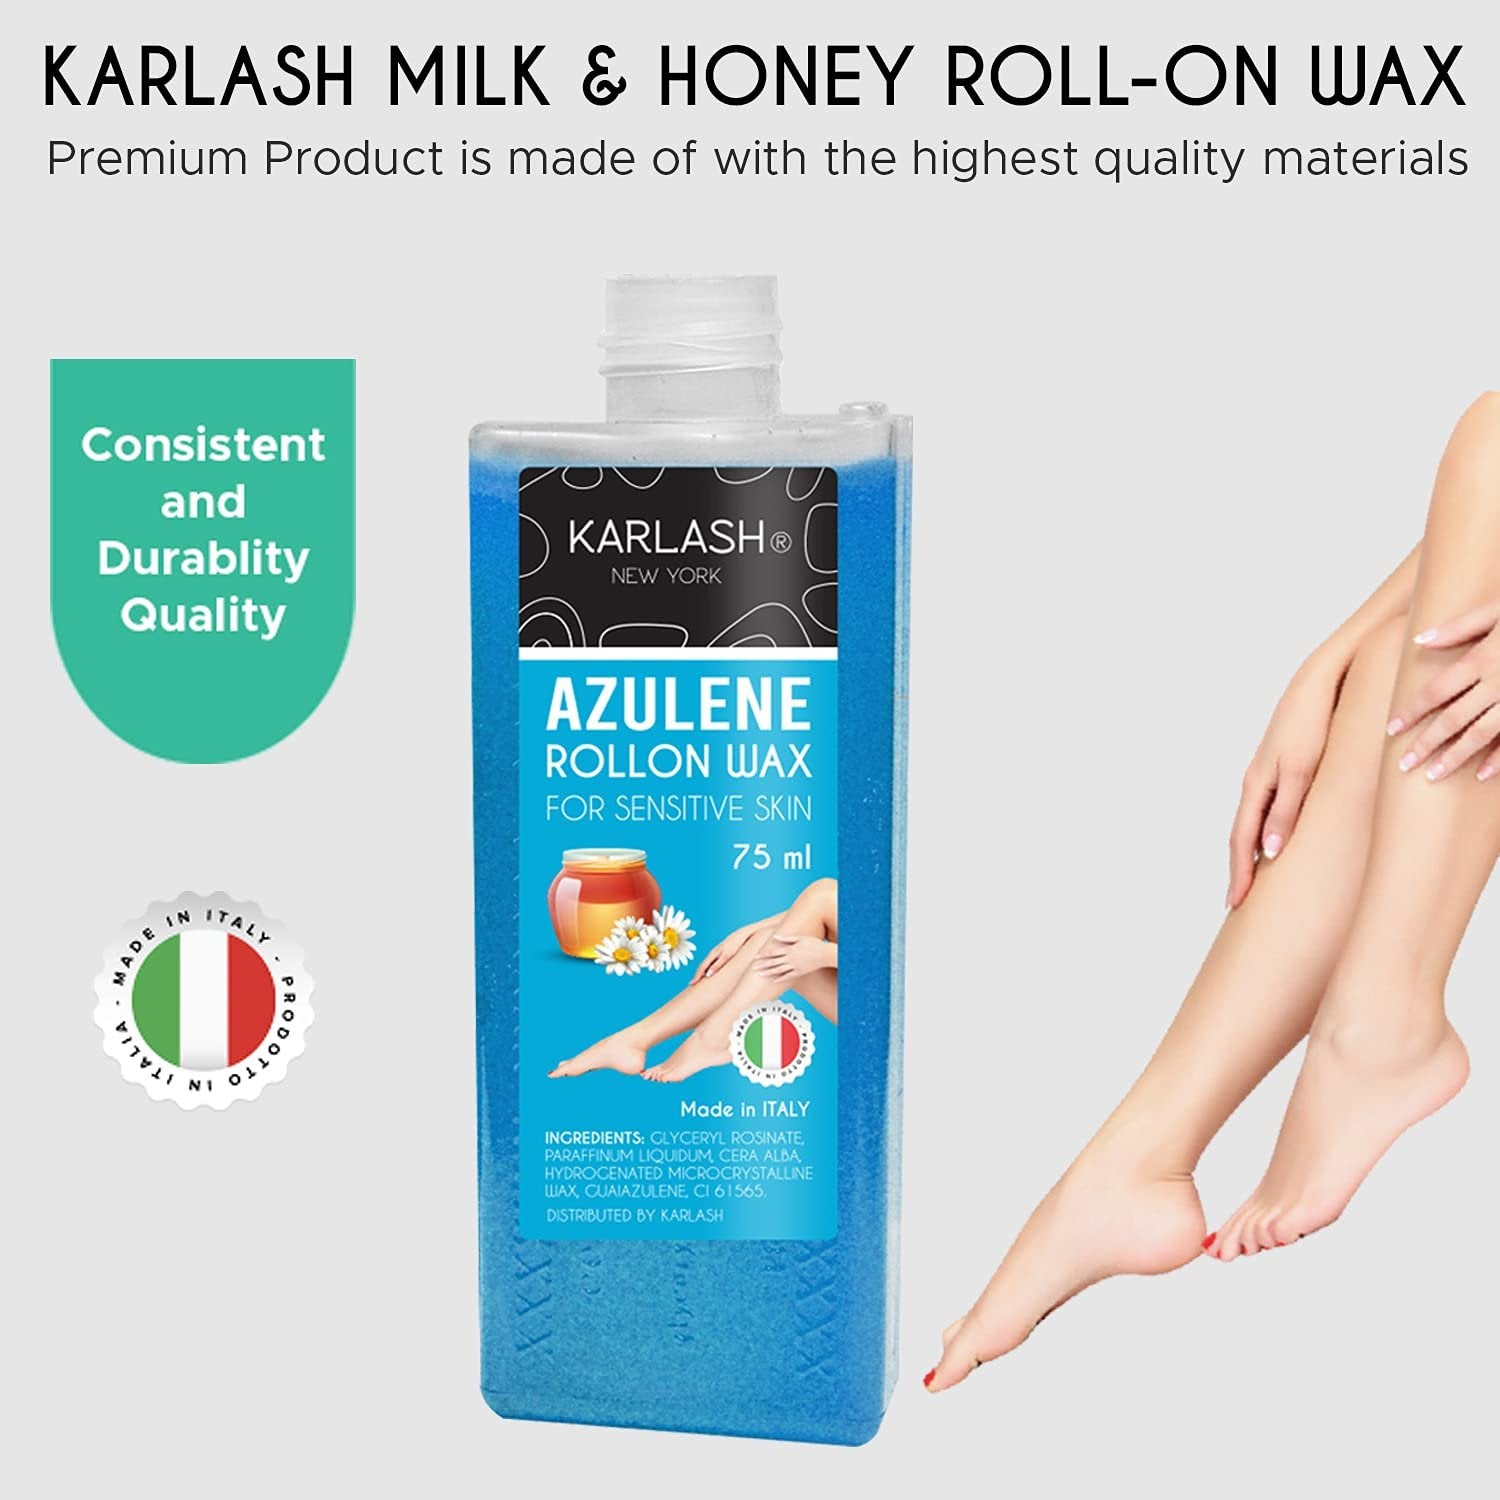 Karlash Professional Azulene Roll On Wax for Sensitive Skin, Depilatory Hair Wax Removal for Body Hair, legs, arms hair Removal Wax Cartridge 75 ml Honey - Made in Italy - 2 Pieces